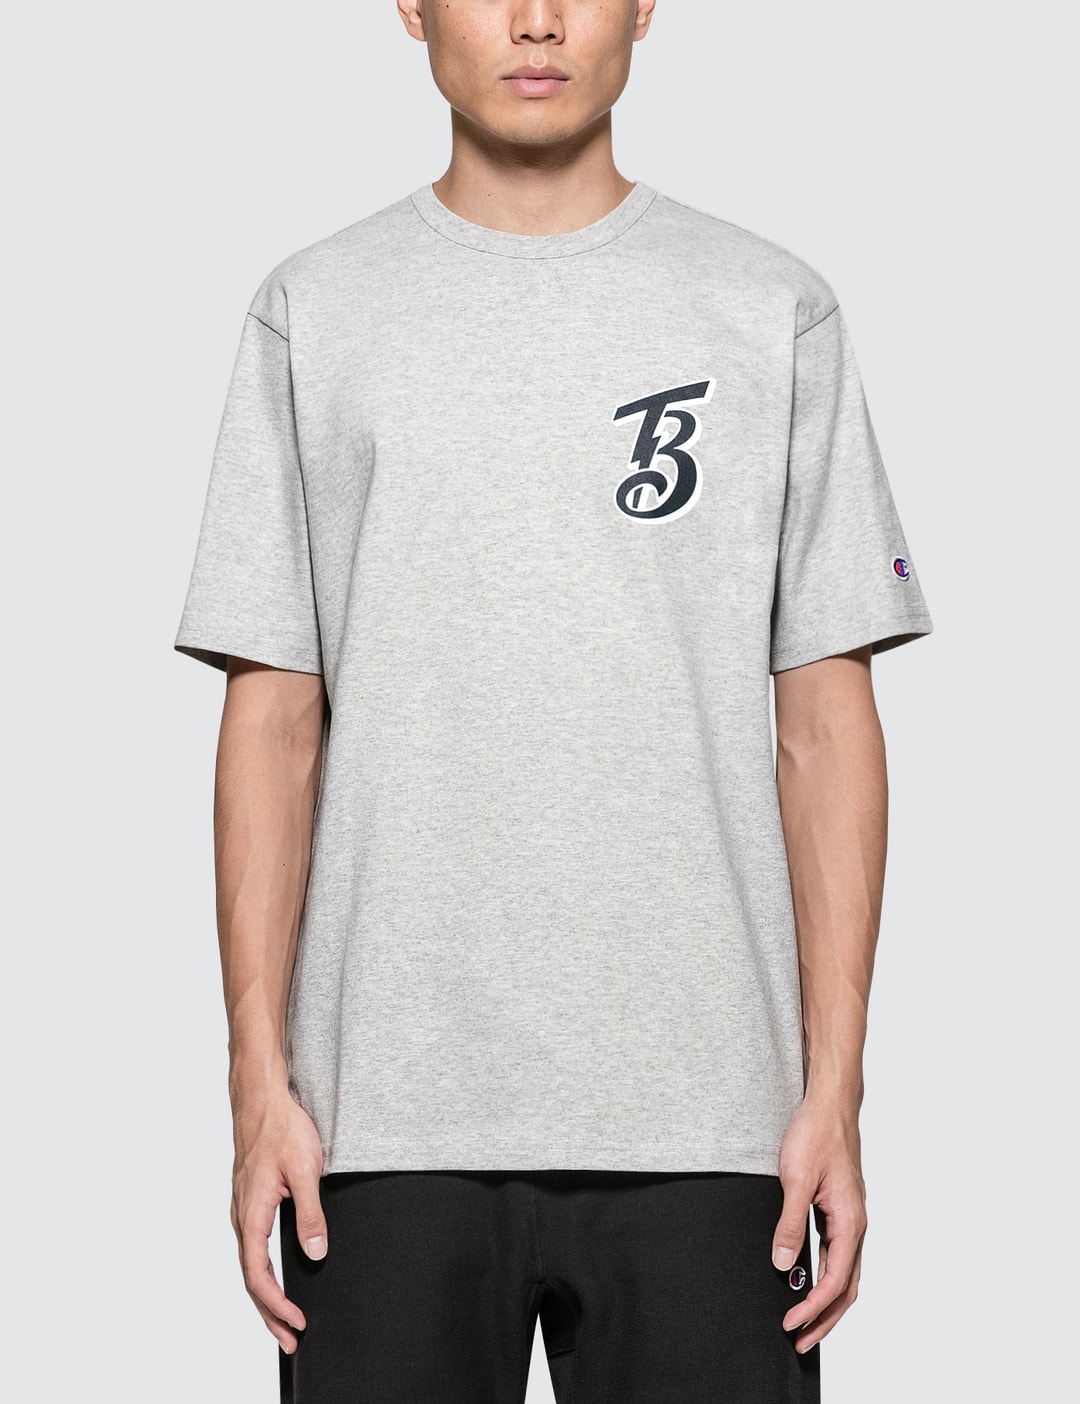 Versterken Psychologisch Rijpen Champion Reverse Weave - Beams x Champion Tokyo Logo S/S T-Shirt | HBX -  Globally Curated Fashion and Lifestyle by Hypebeast